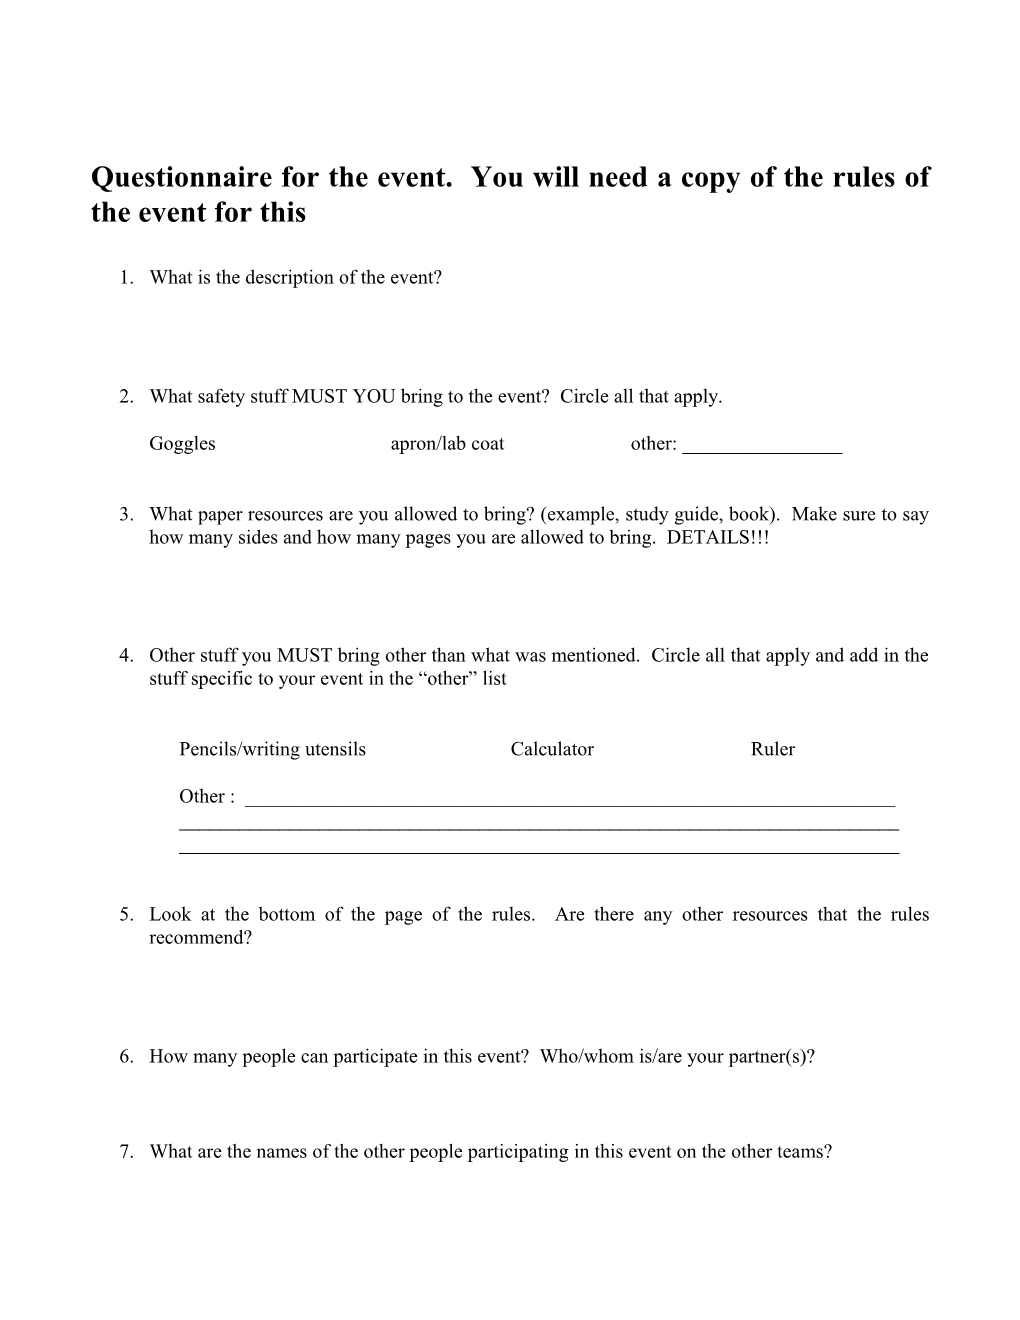 Questionnaire for the Event. You Will Need a Copy of the Rules of the Event for This